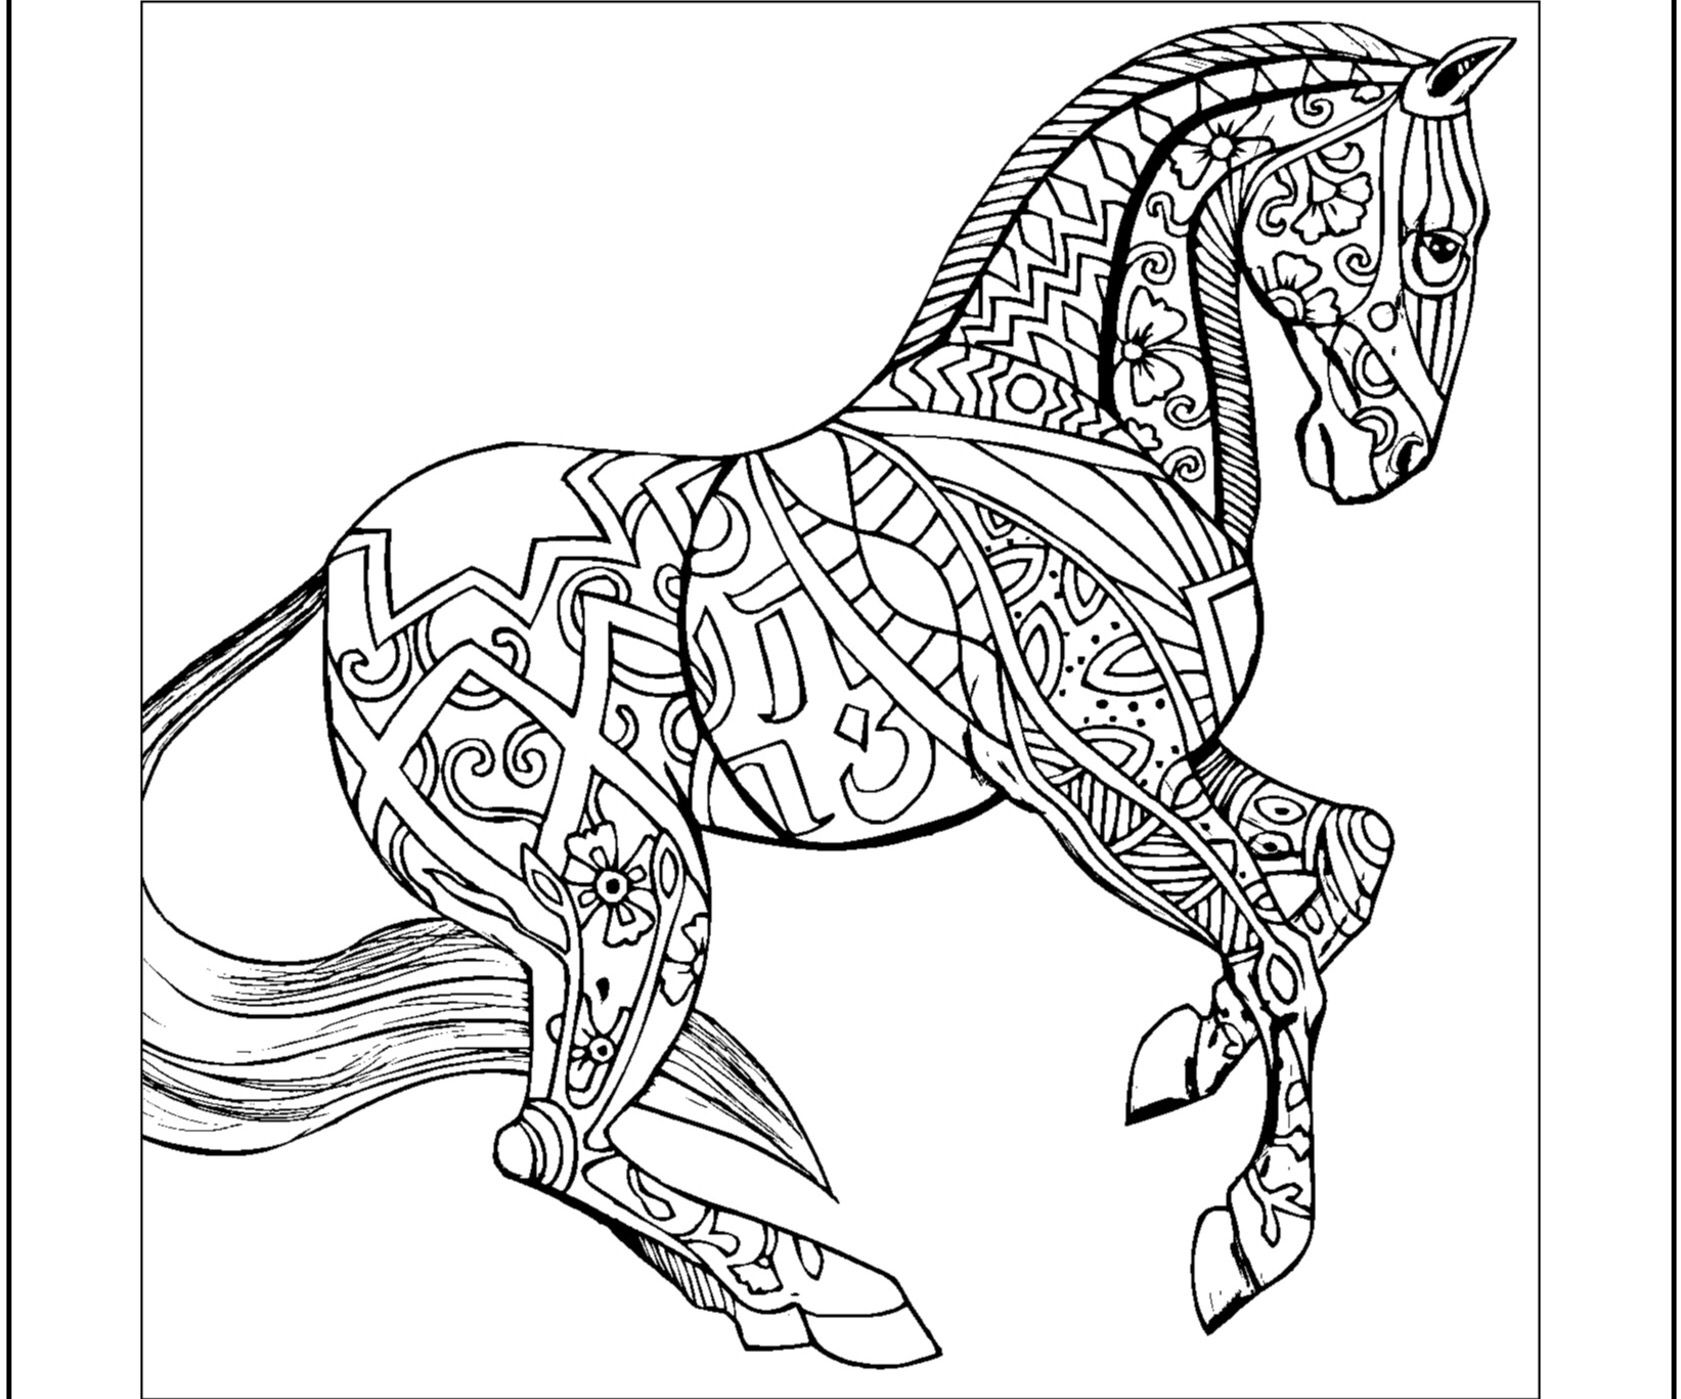 Zentangle Horse Sketch Coloring Page